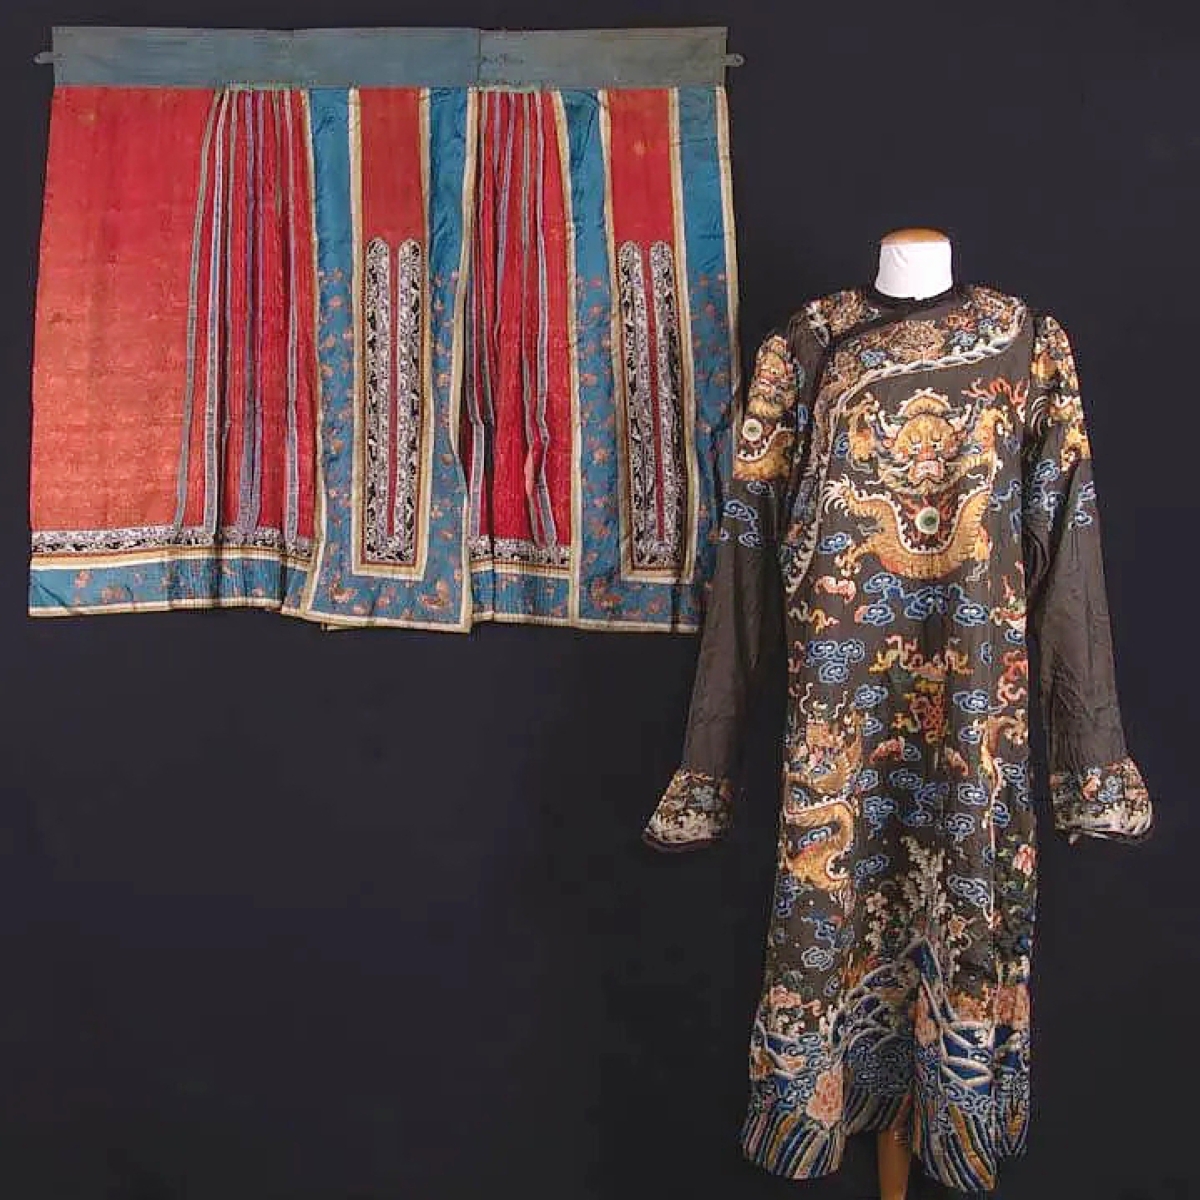 “It’s not a nine-dragon robe, it was an eight-dragon,” Ricklis said of this Nineteenth Century example with Mandarin skirts. “We would expect there to be a ninth under the opening, but it was absent.” Consigned by the Society for the Preservation of Federal Hill & Fell’s Point, the lot went out at $3,875.